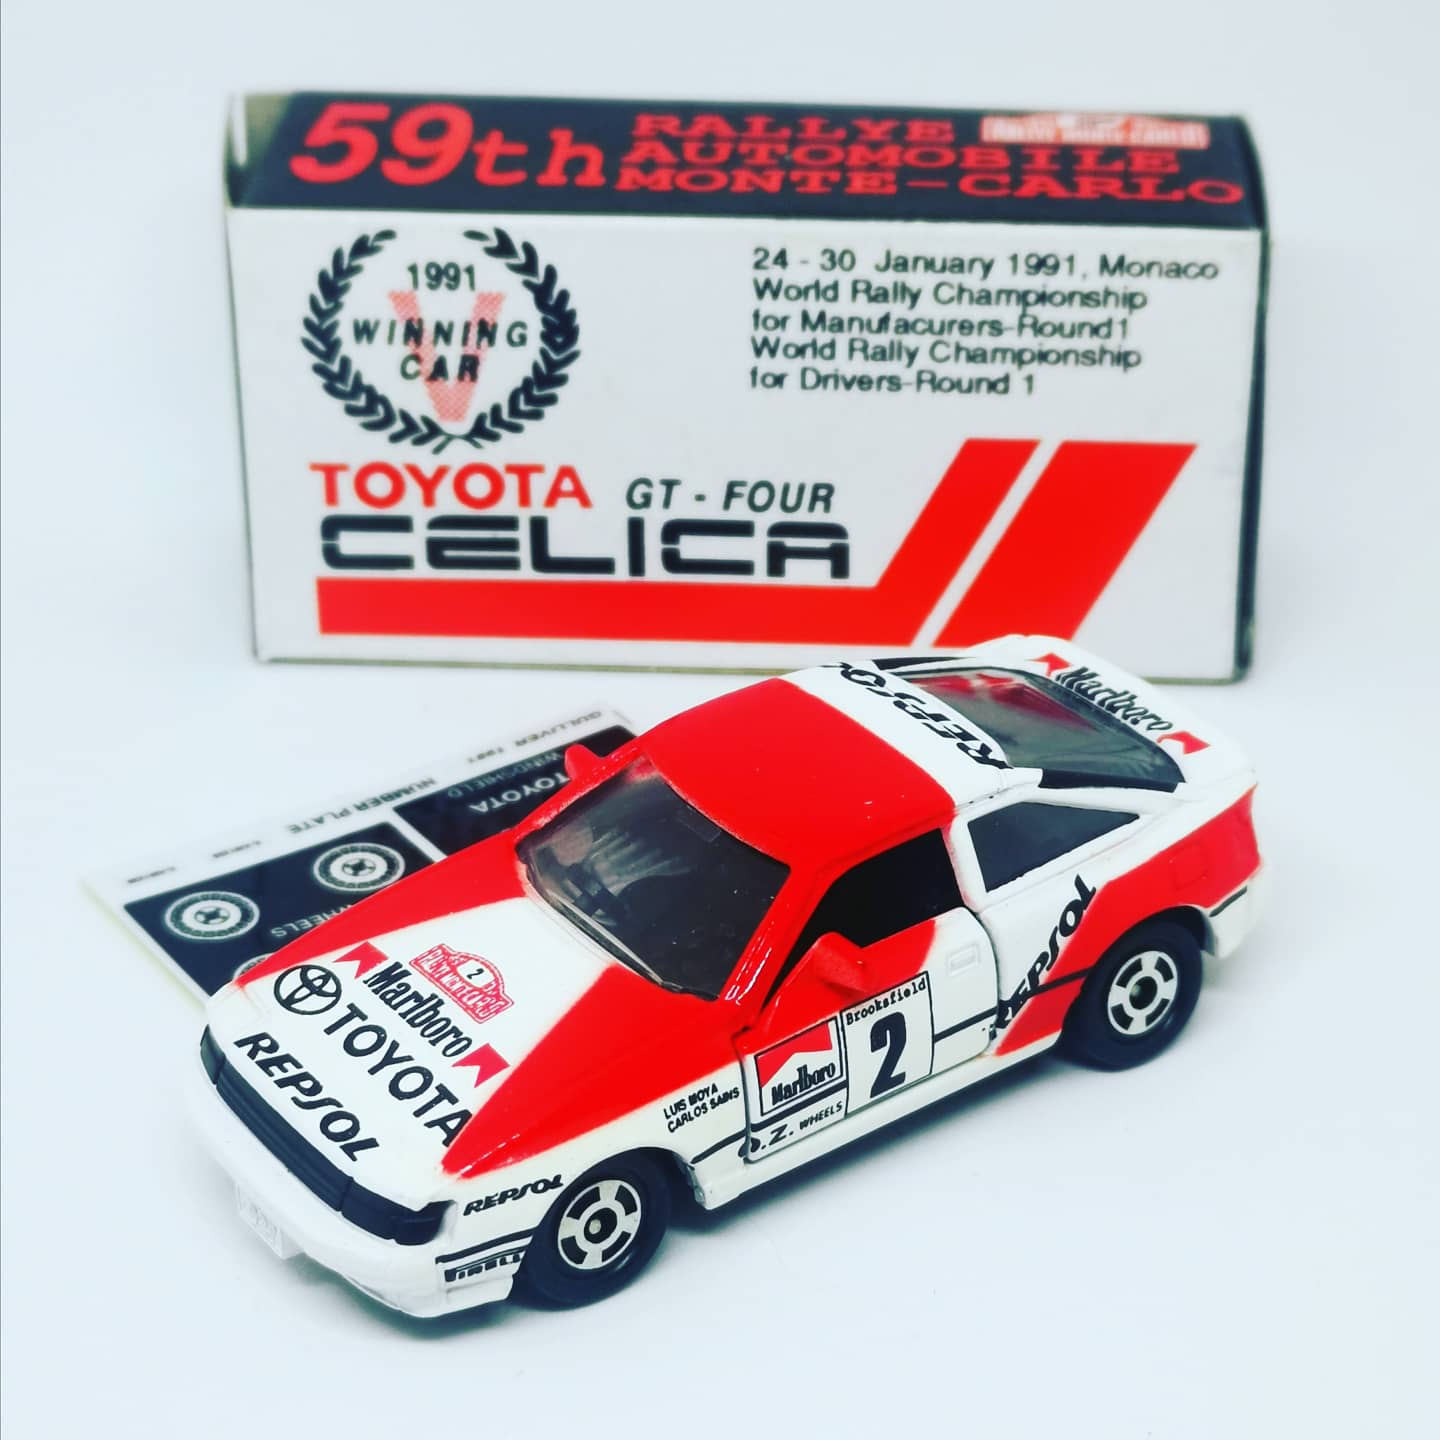 Tomica Toyota Celica GT Four St165
1991 59tg Monte Carlo WRC Winning Car 1:58 Scale